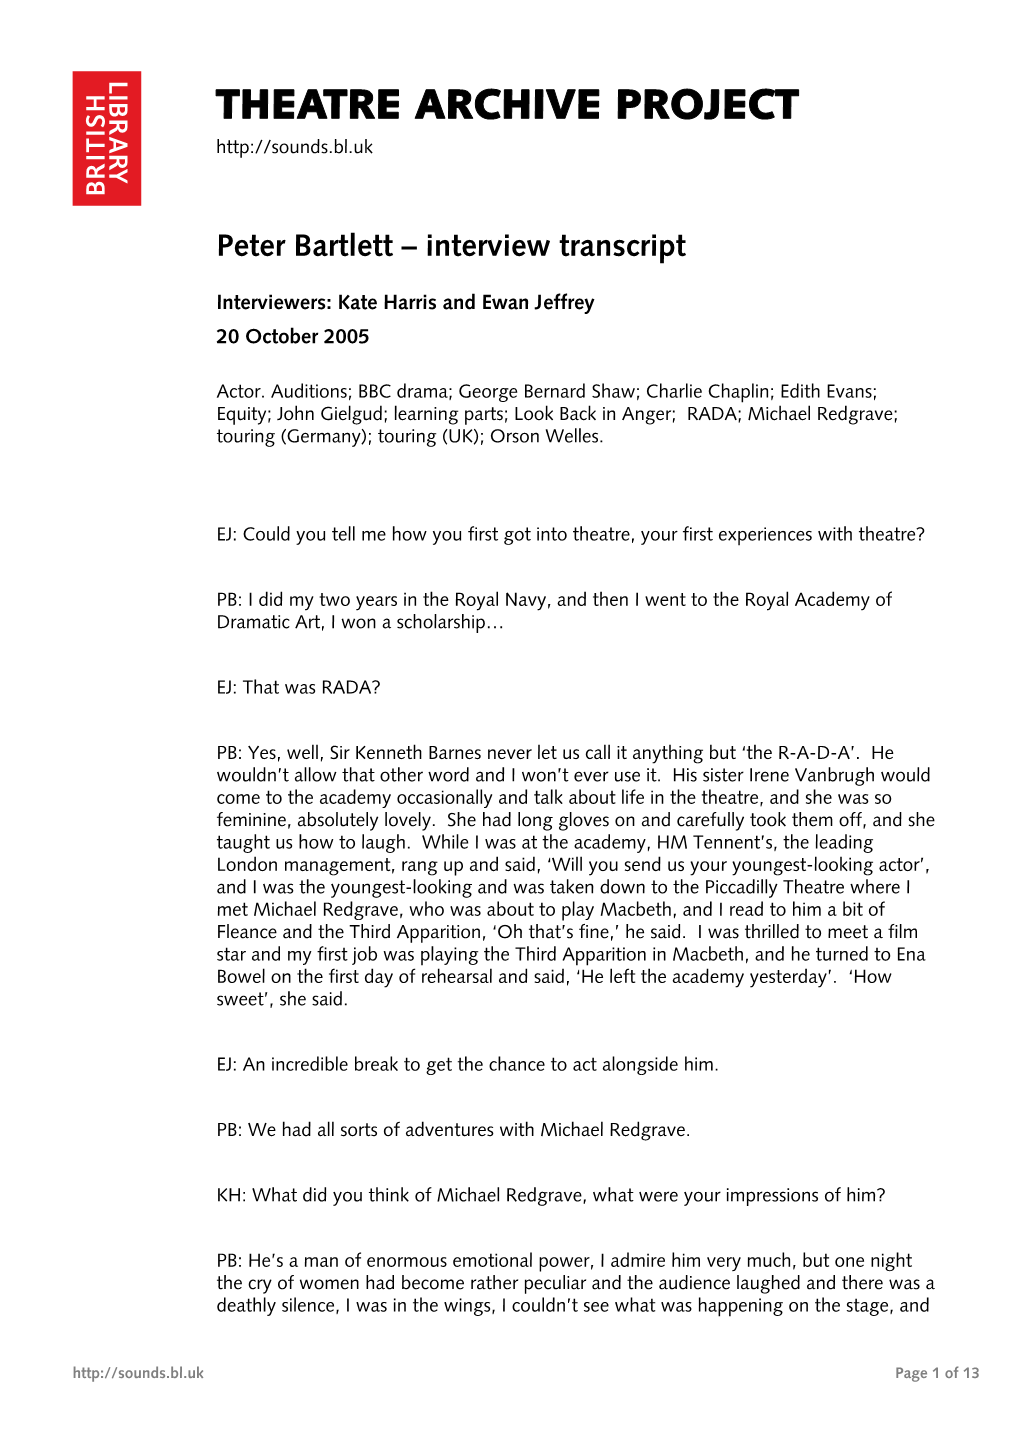 Theatre Archive Project: Interview with Peter Bartlett